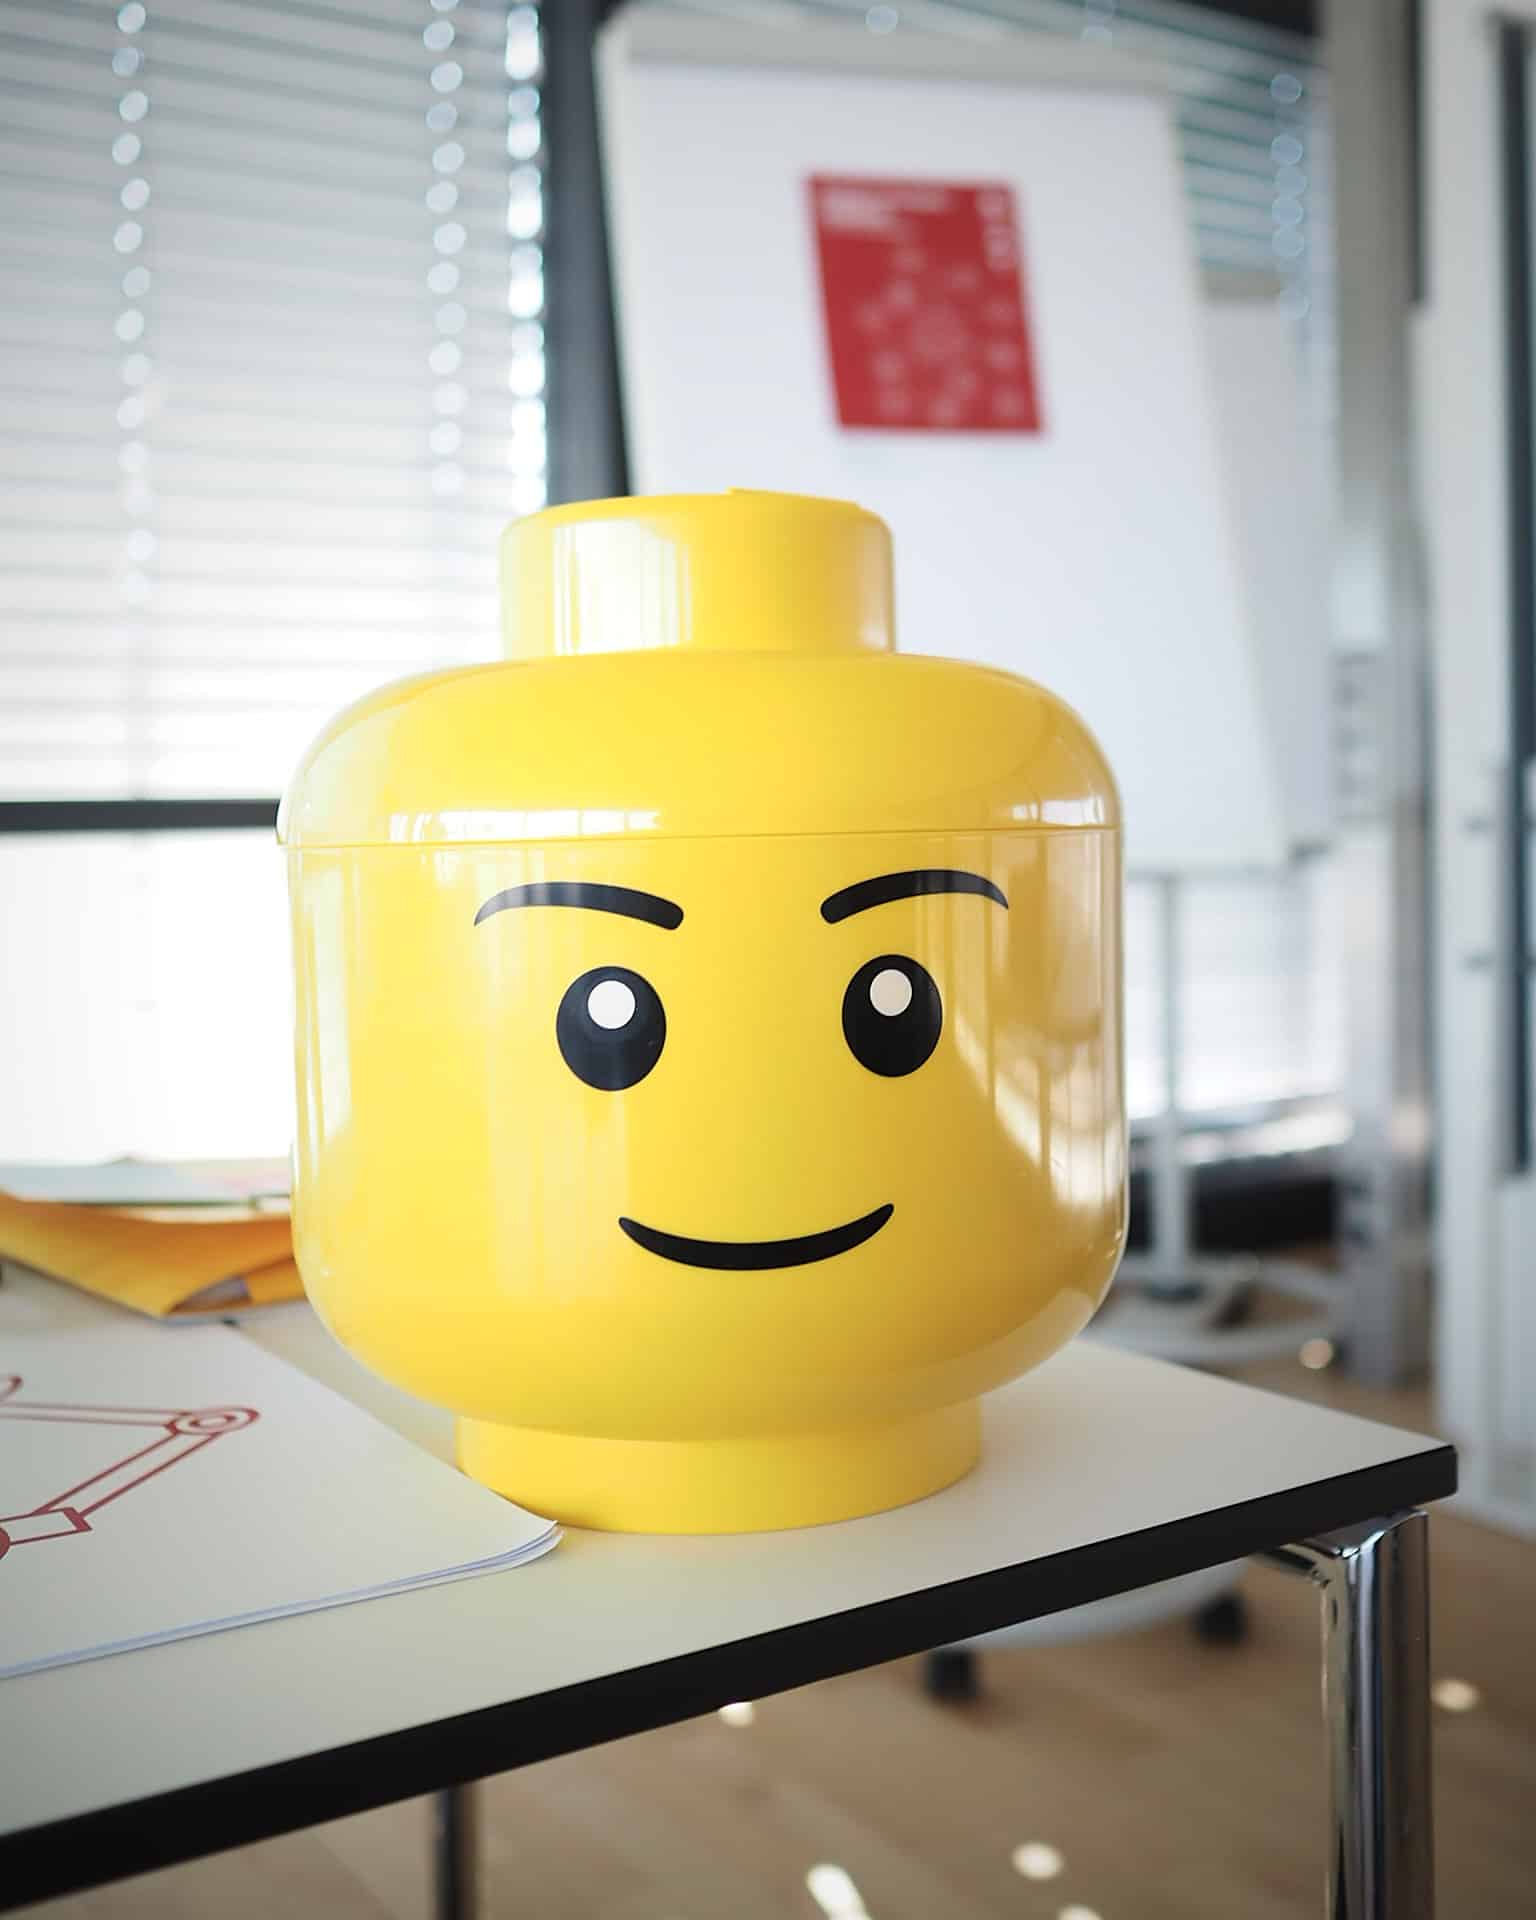 Brand Strategy Workshop mit Lego Serious Play®